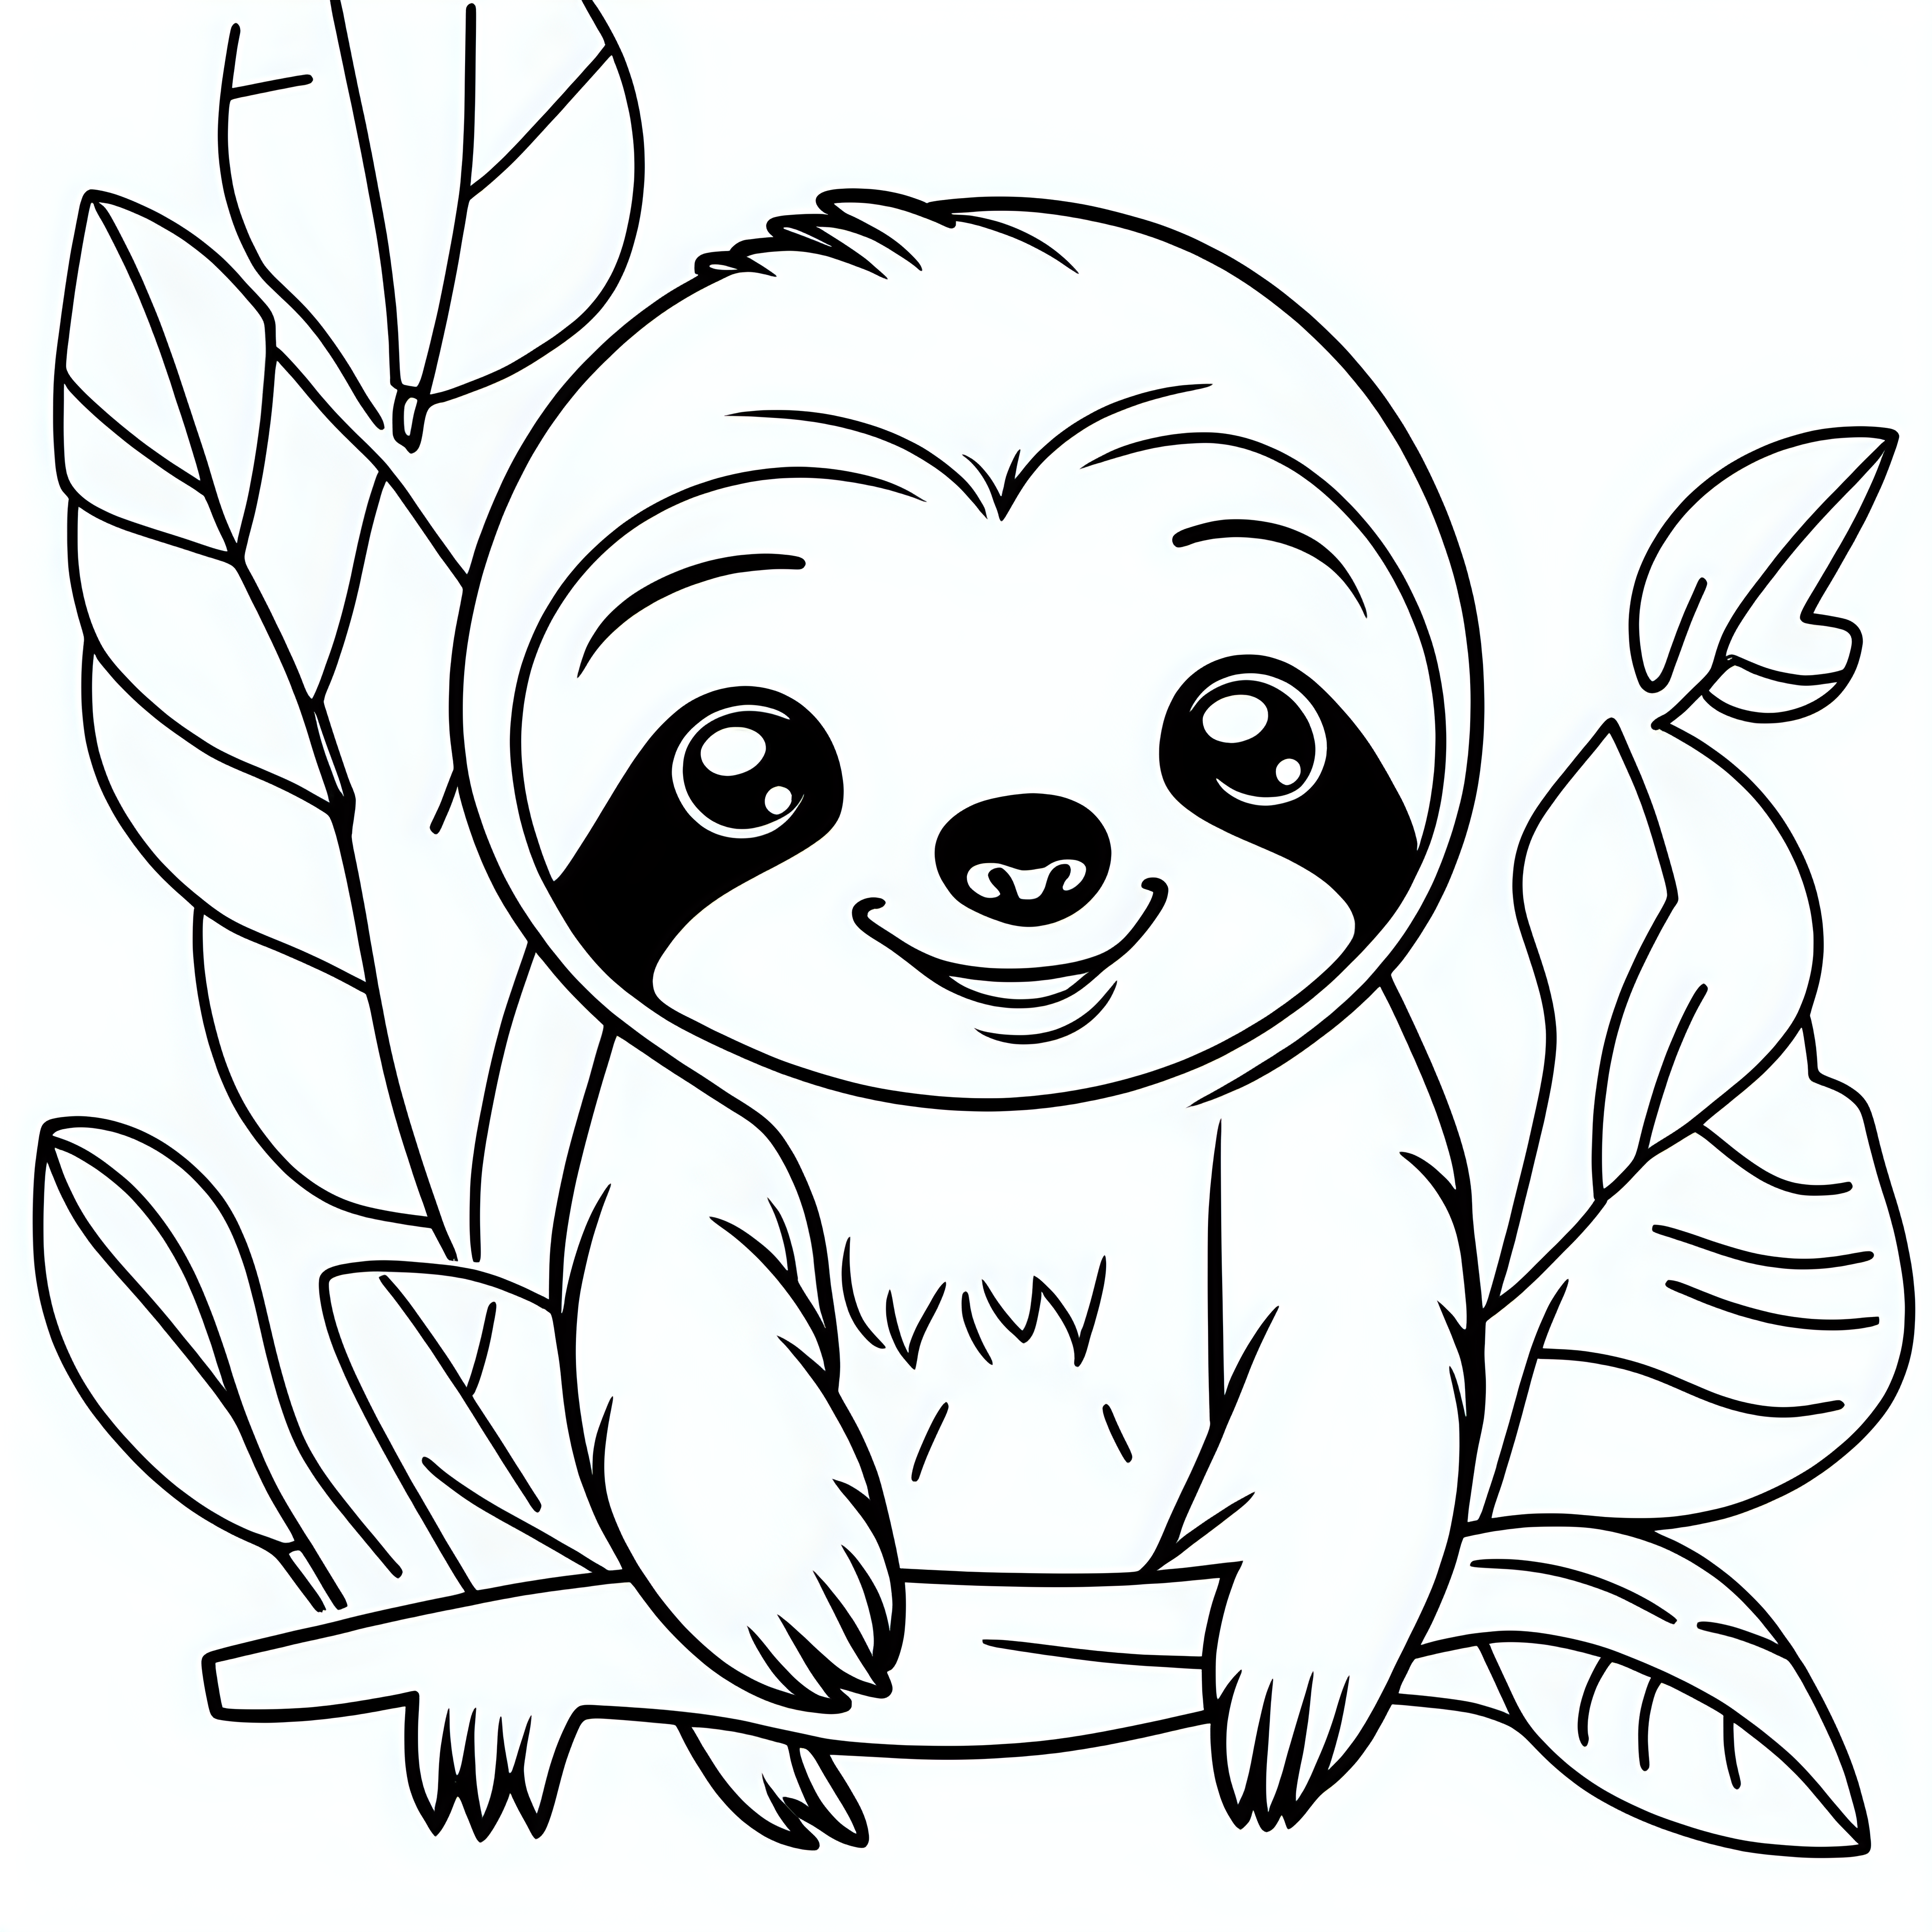 draw a cute sloth  with only the outline in black for a coloring book for kids